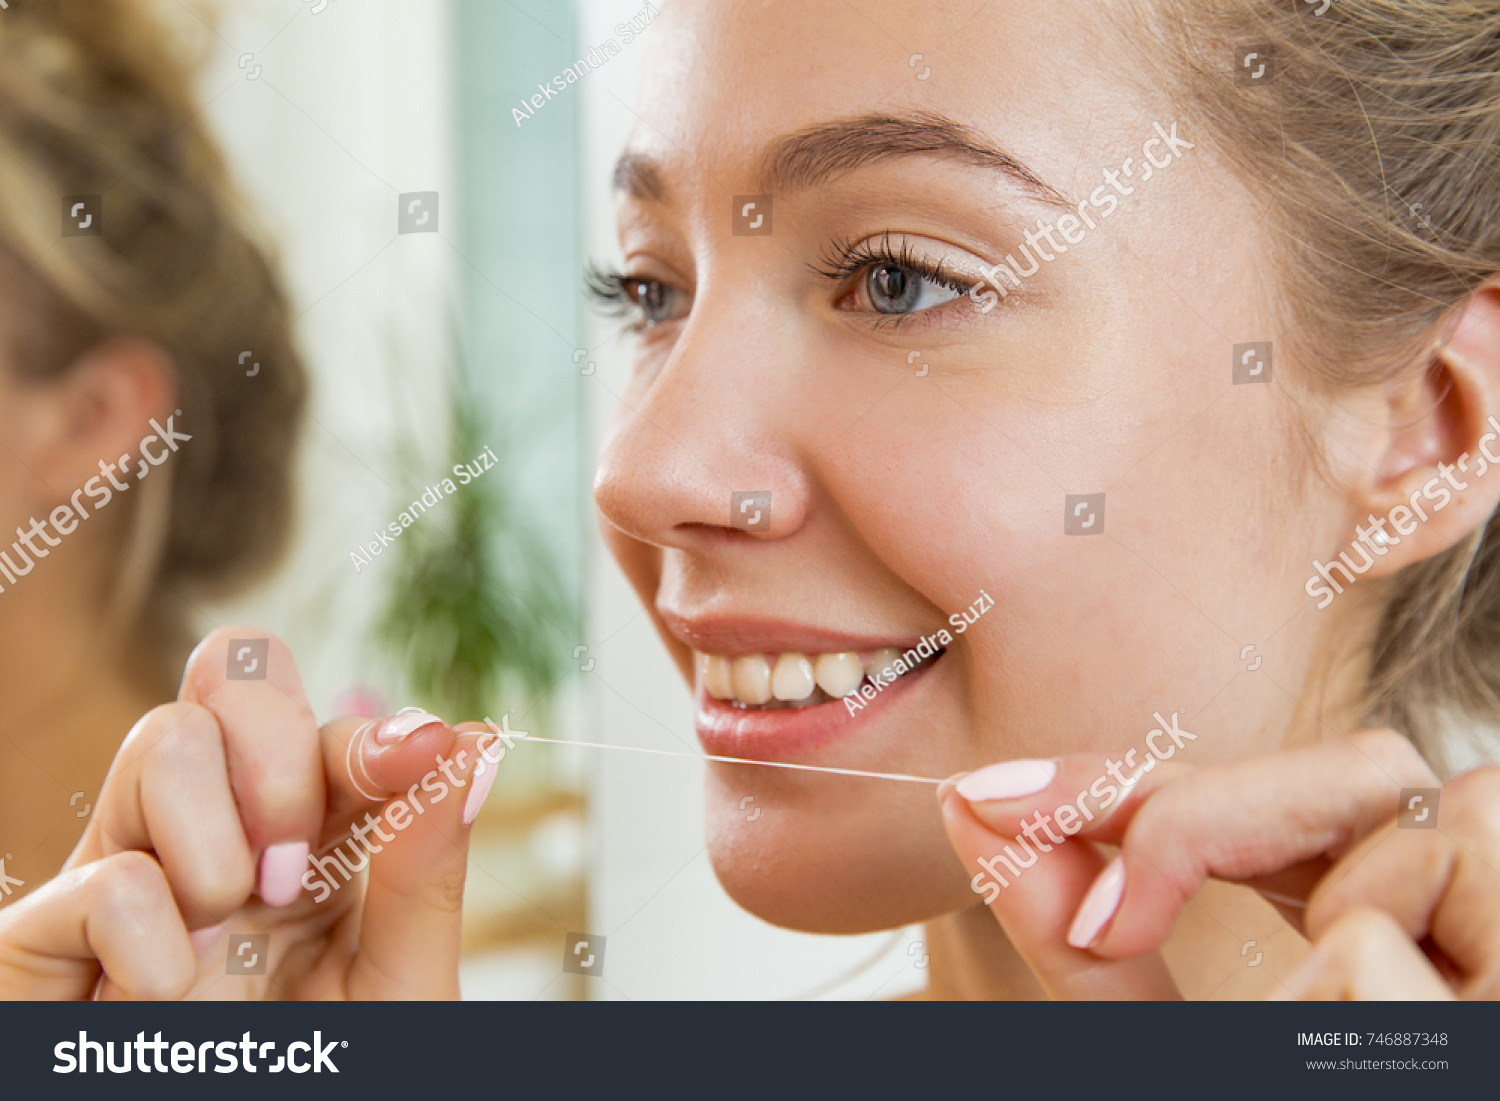 Young beautiful woman cleaning her teeth with floss in bathroom. Standing in towel, looking in the mirror, laughing and having fun. Daily routine. Beautiful smile with white teeth. #746887348